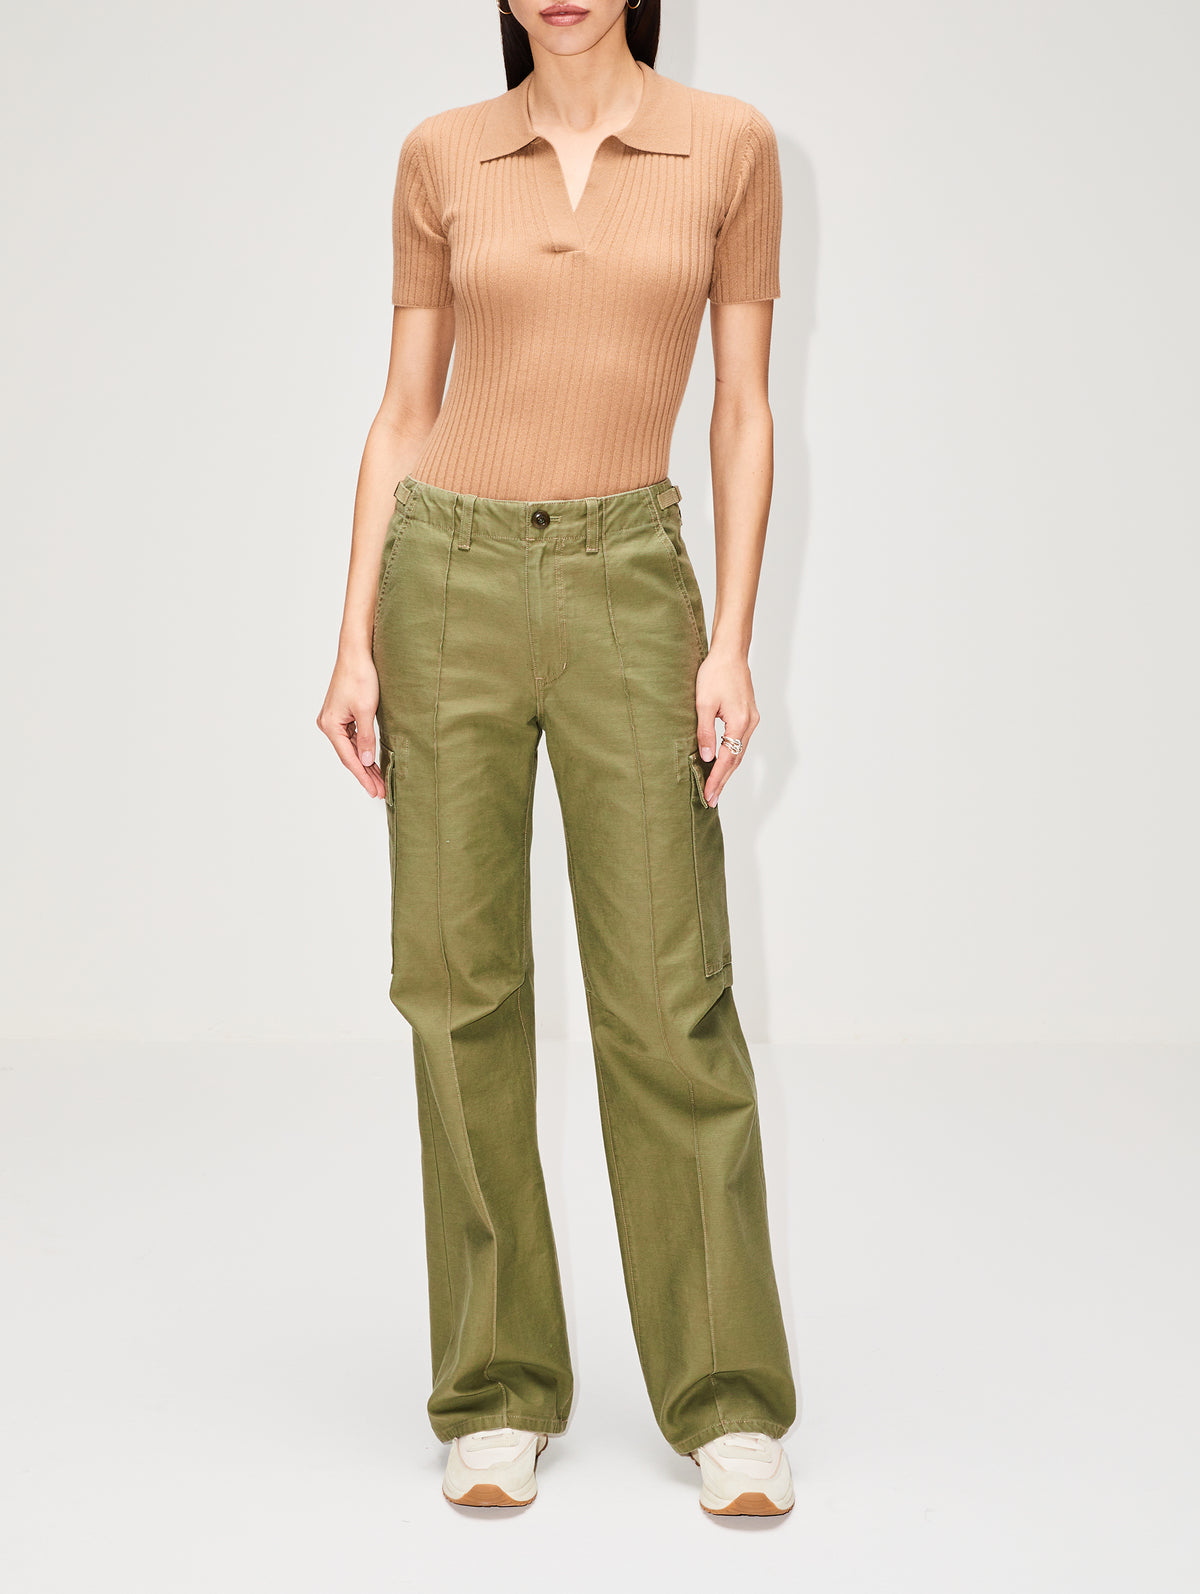 view 2 - Military Trouser